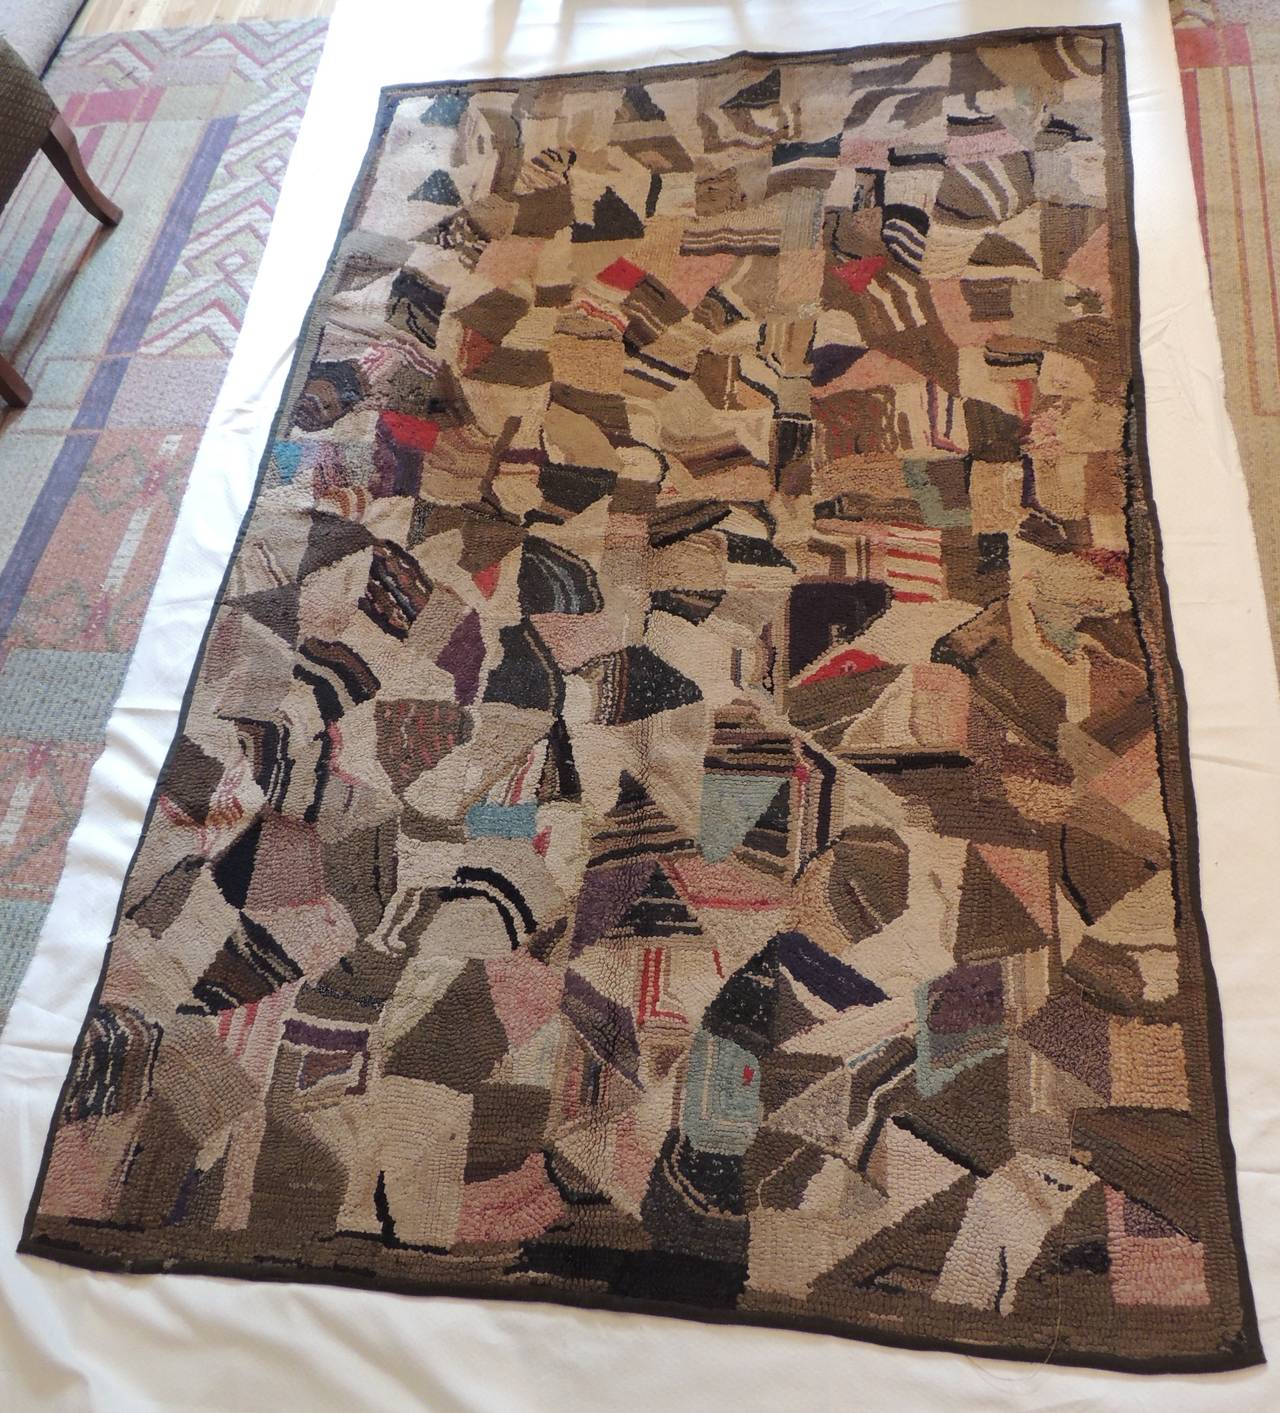 Crazy quilt pattern American hook rug in shades of brown and pink. Thick pile.
Rug hooking is both an art and a craft where rugs are made by pulling loops of yarn or fabric through a stiff woven base such as burlap, linen, or rug warp. The loops are